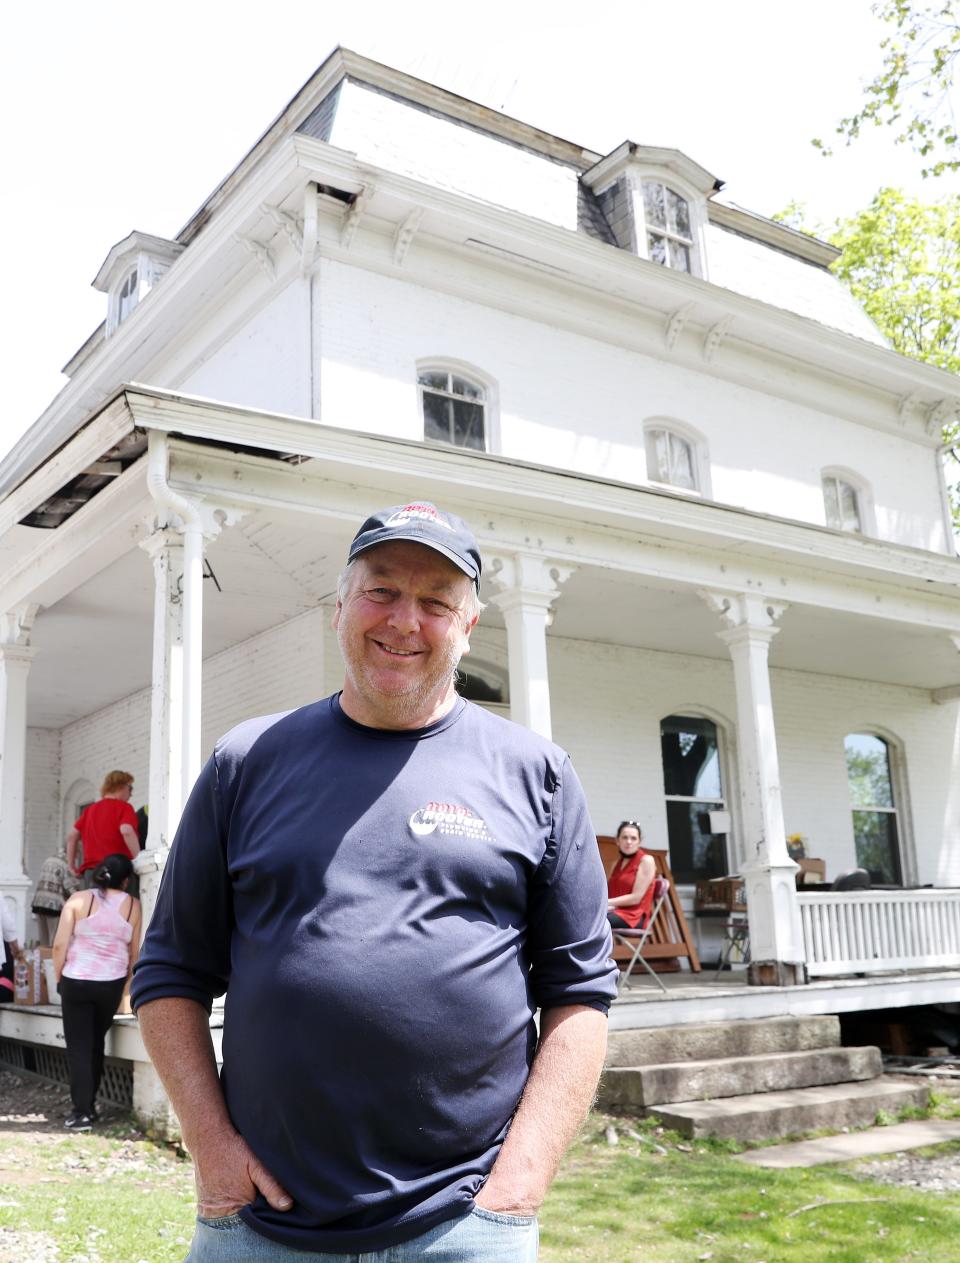 Richard Skjrli, pastor of Fuente de Gracia, in the village of Brewster, stand in front of the Lobdell house in the village  May 5, 2022. The Lobdell house is schedule for demolition in the revitalization plan.